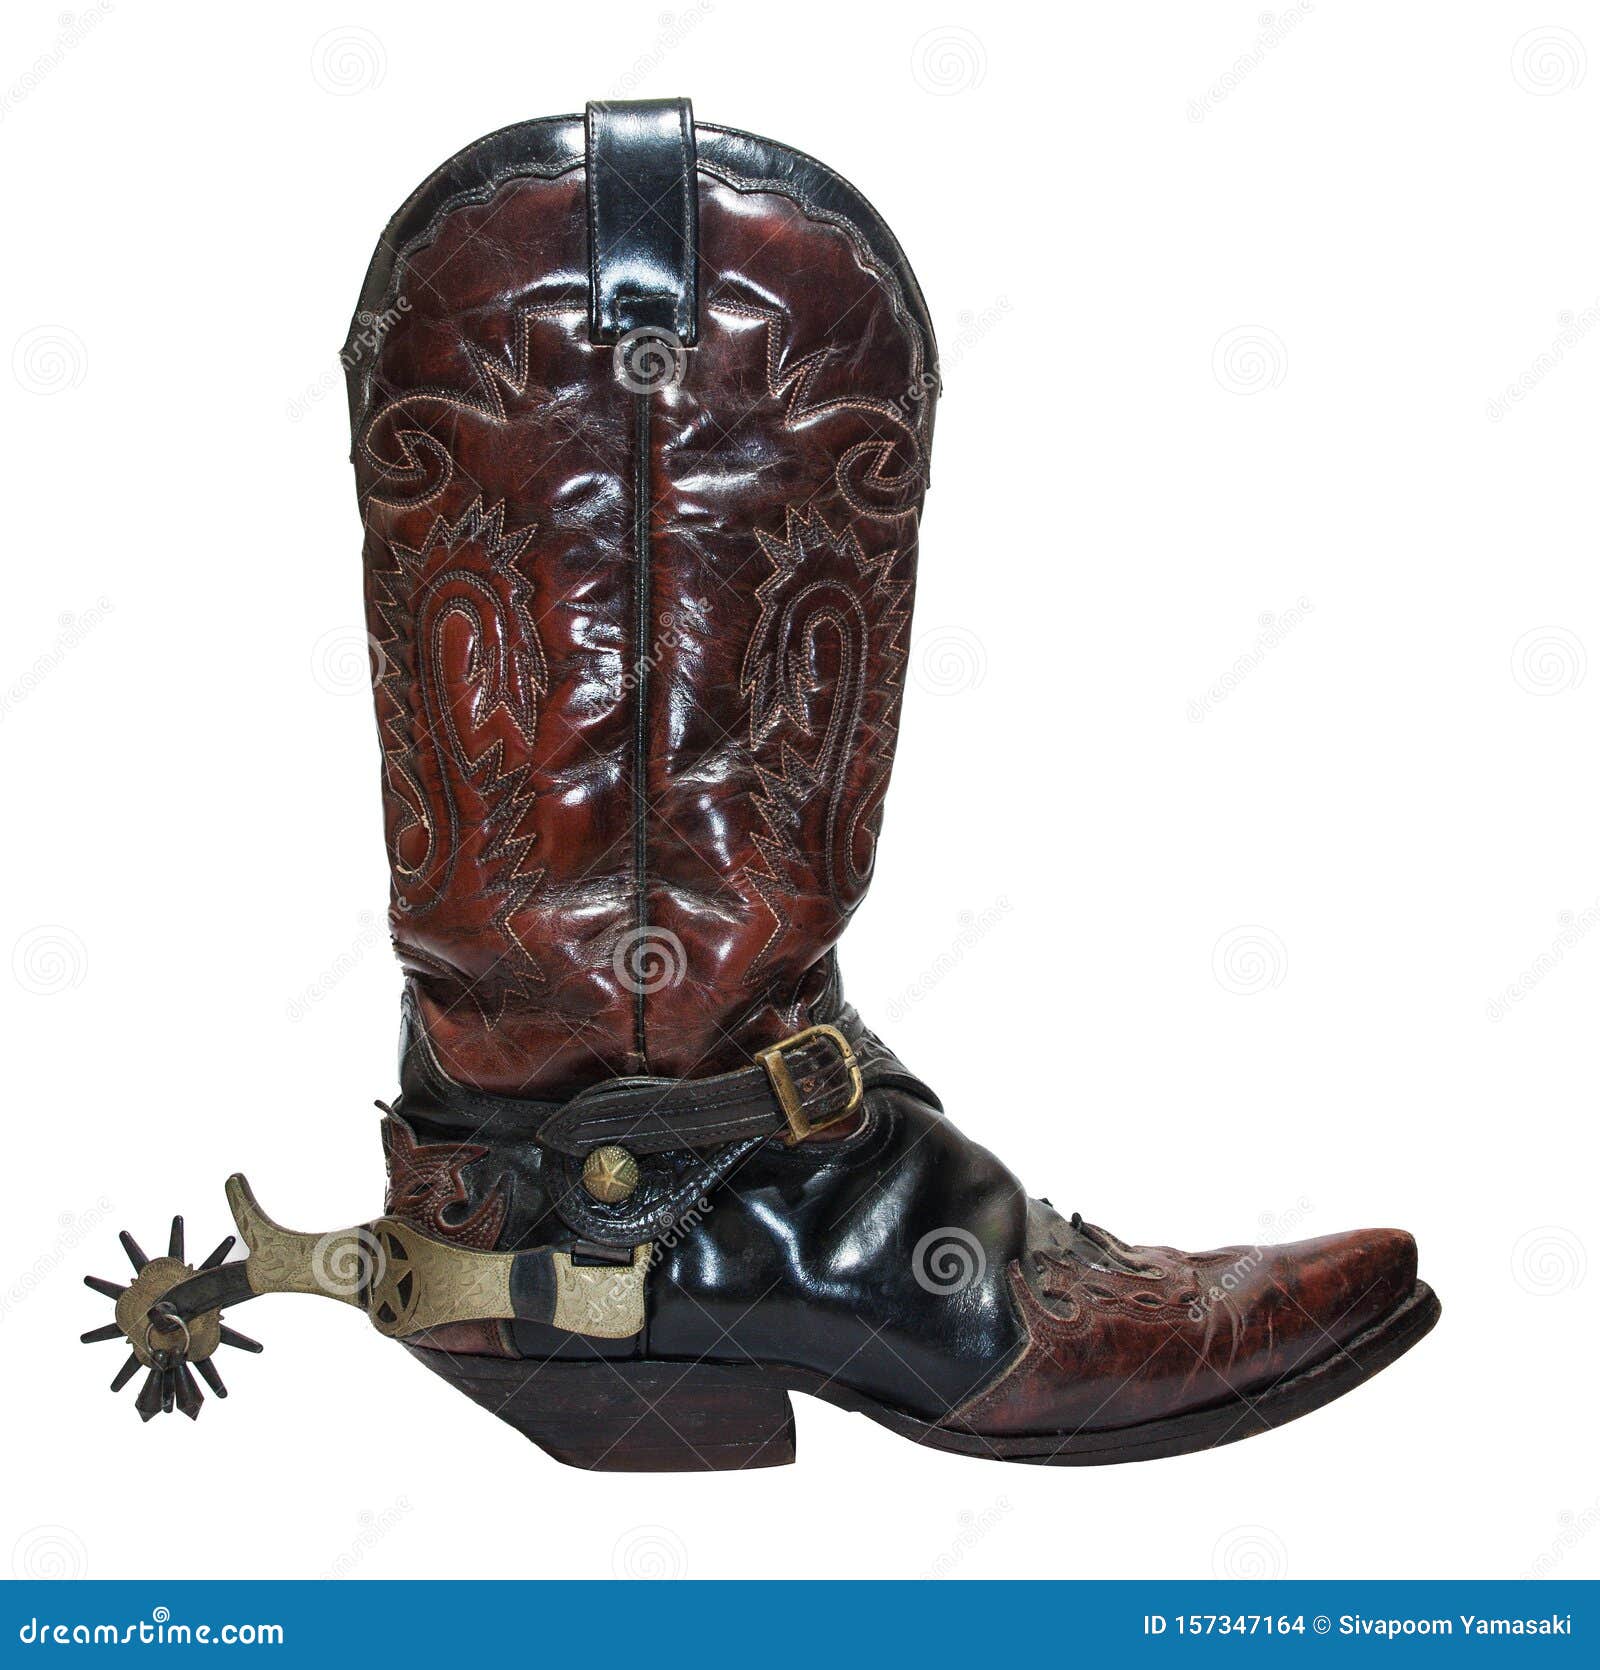 Buy > cowboy boots with studs > in stock